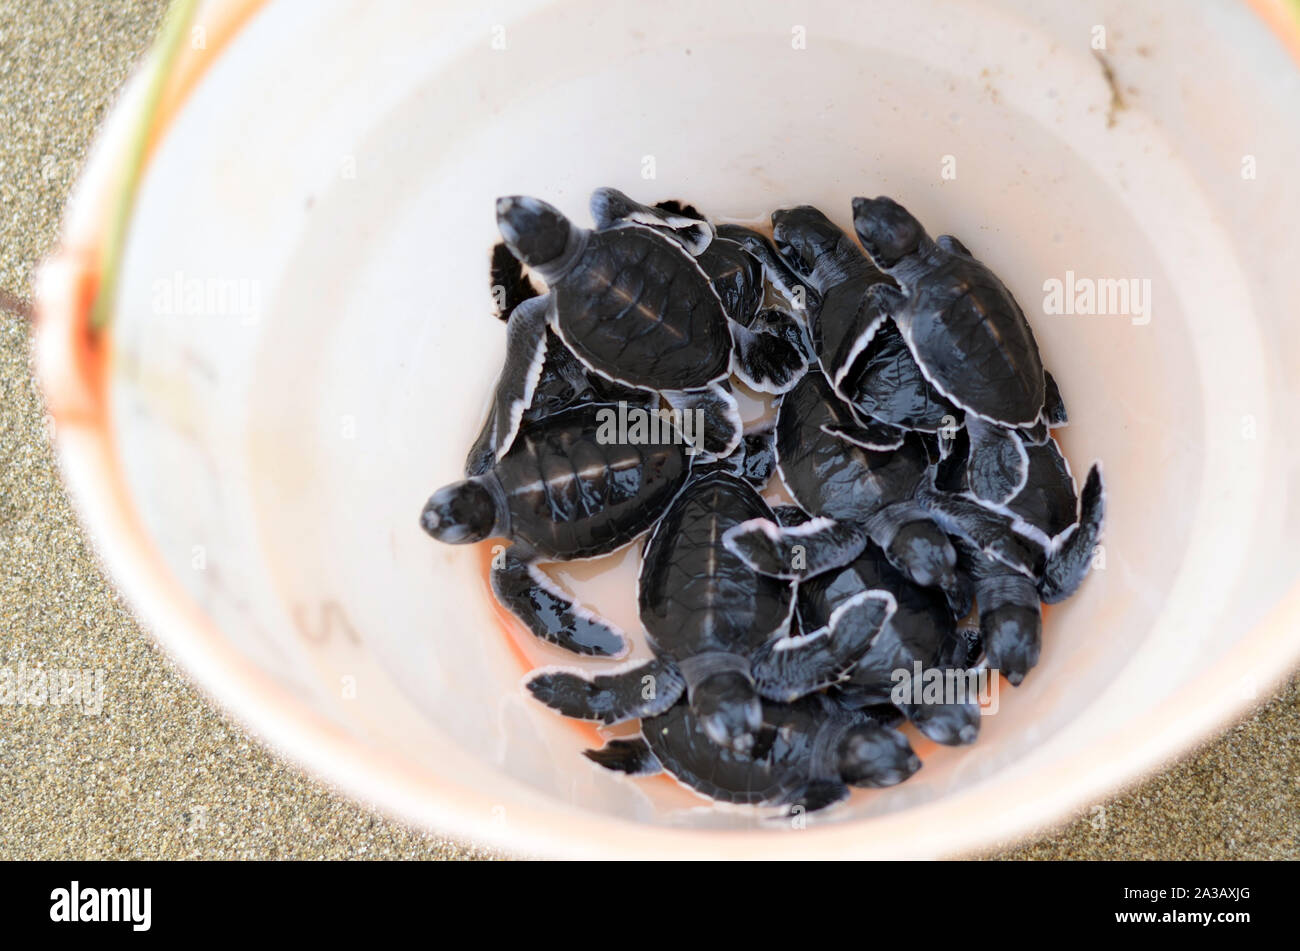 Green turtle hatchling in a bucket Stock Photo